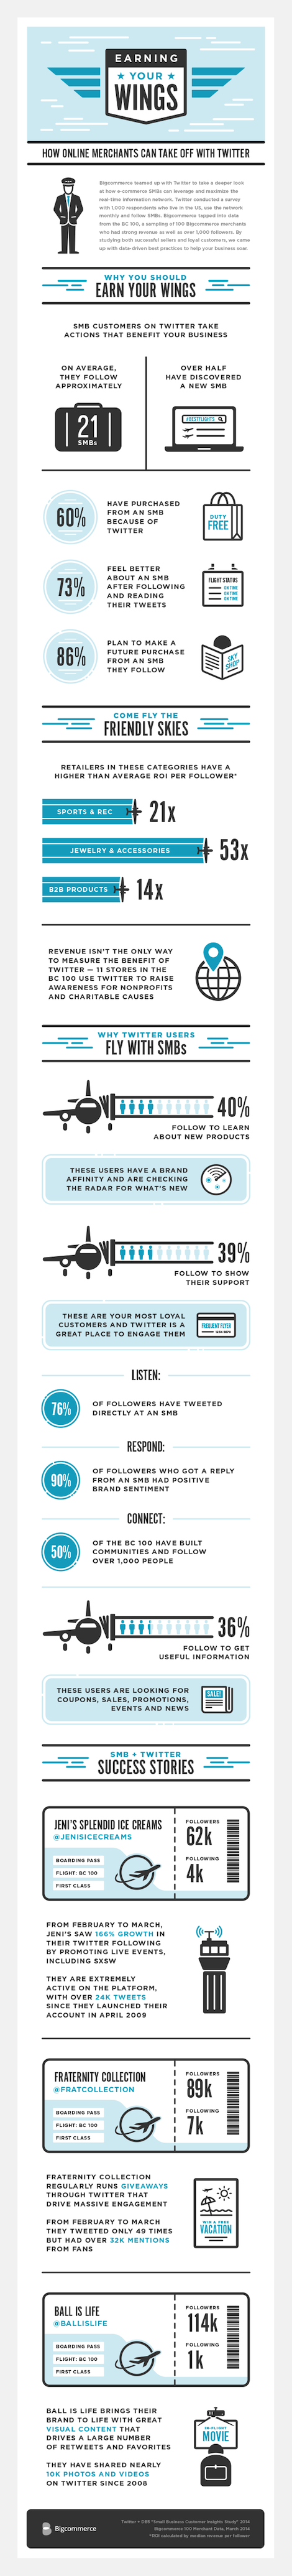 Twitter-Infographic-670w